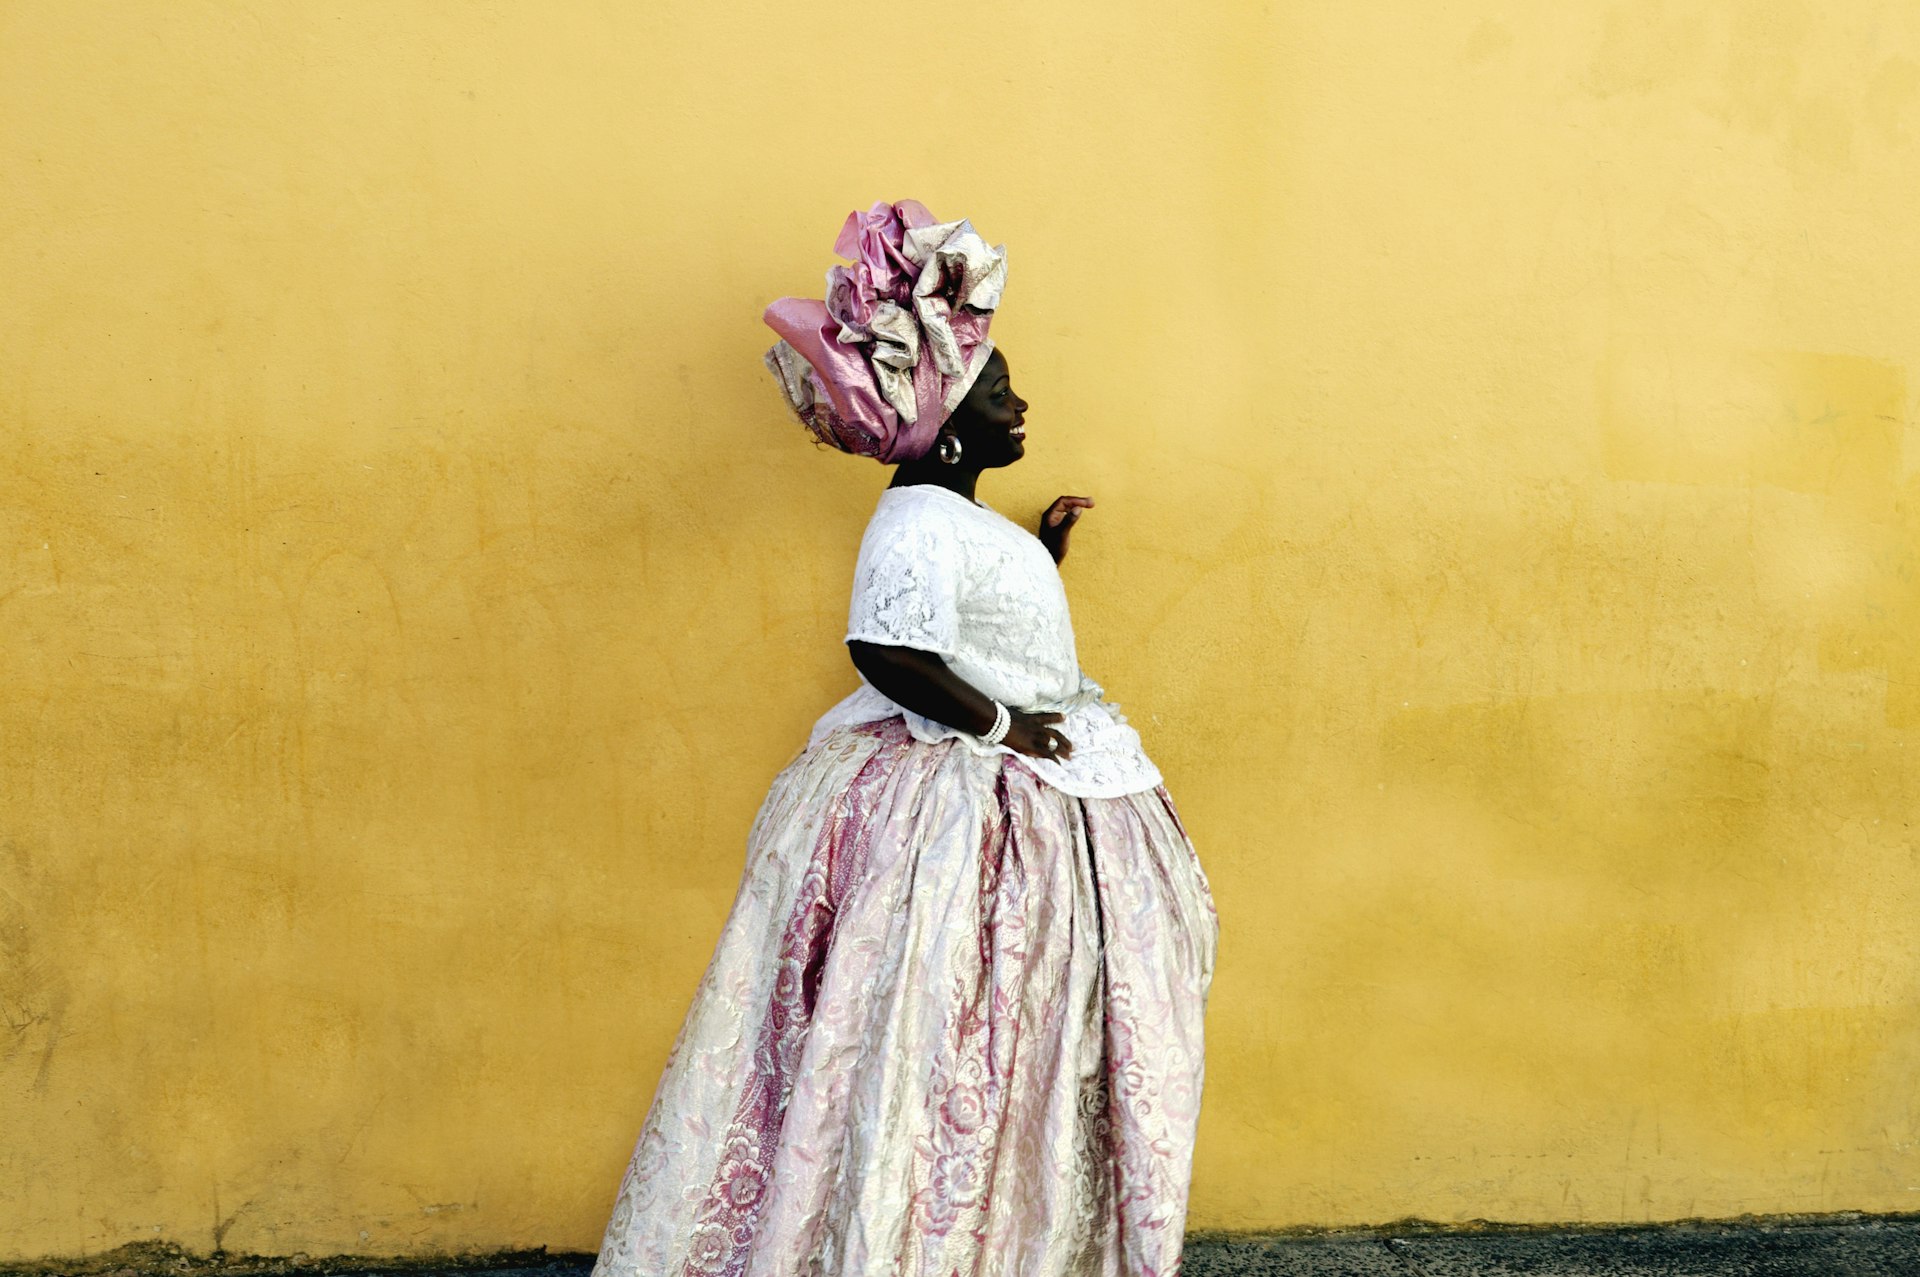 Features - Woman wearing traditional Brazilian clothing, standing by yellow wall